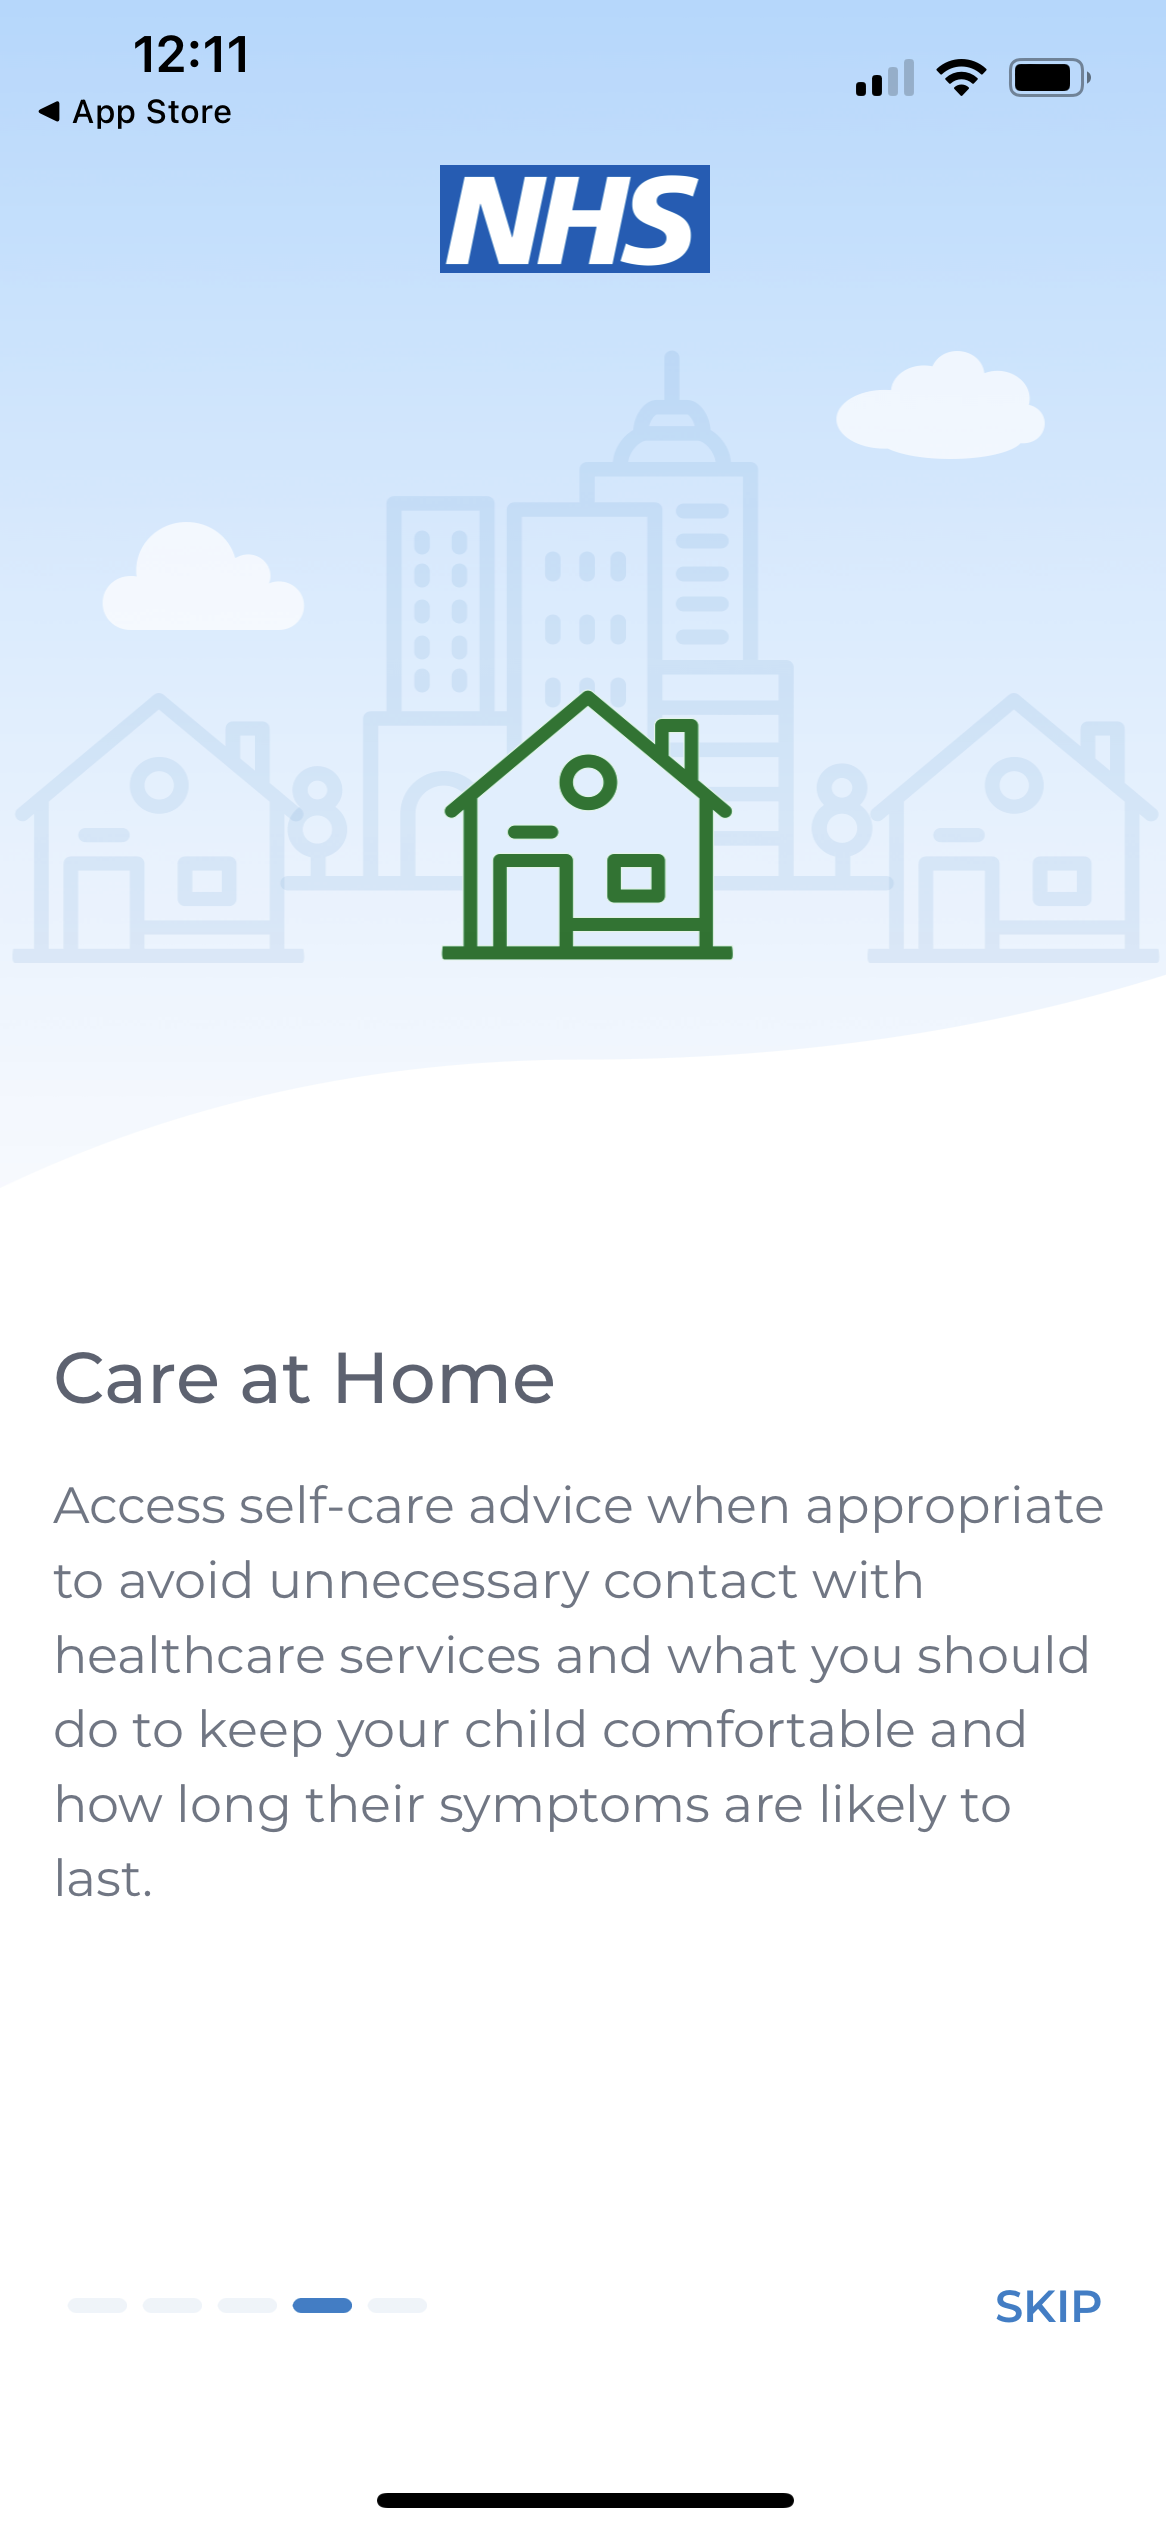 Care at Home
Access self-care advice when appropriate to avoid unnecessary contact with healthcare services and what you should do to keep your child comfortable and how long their symptoms are likely to last.